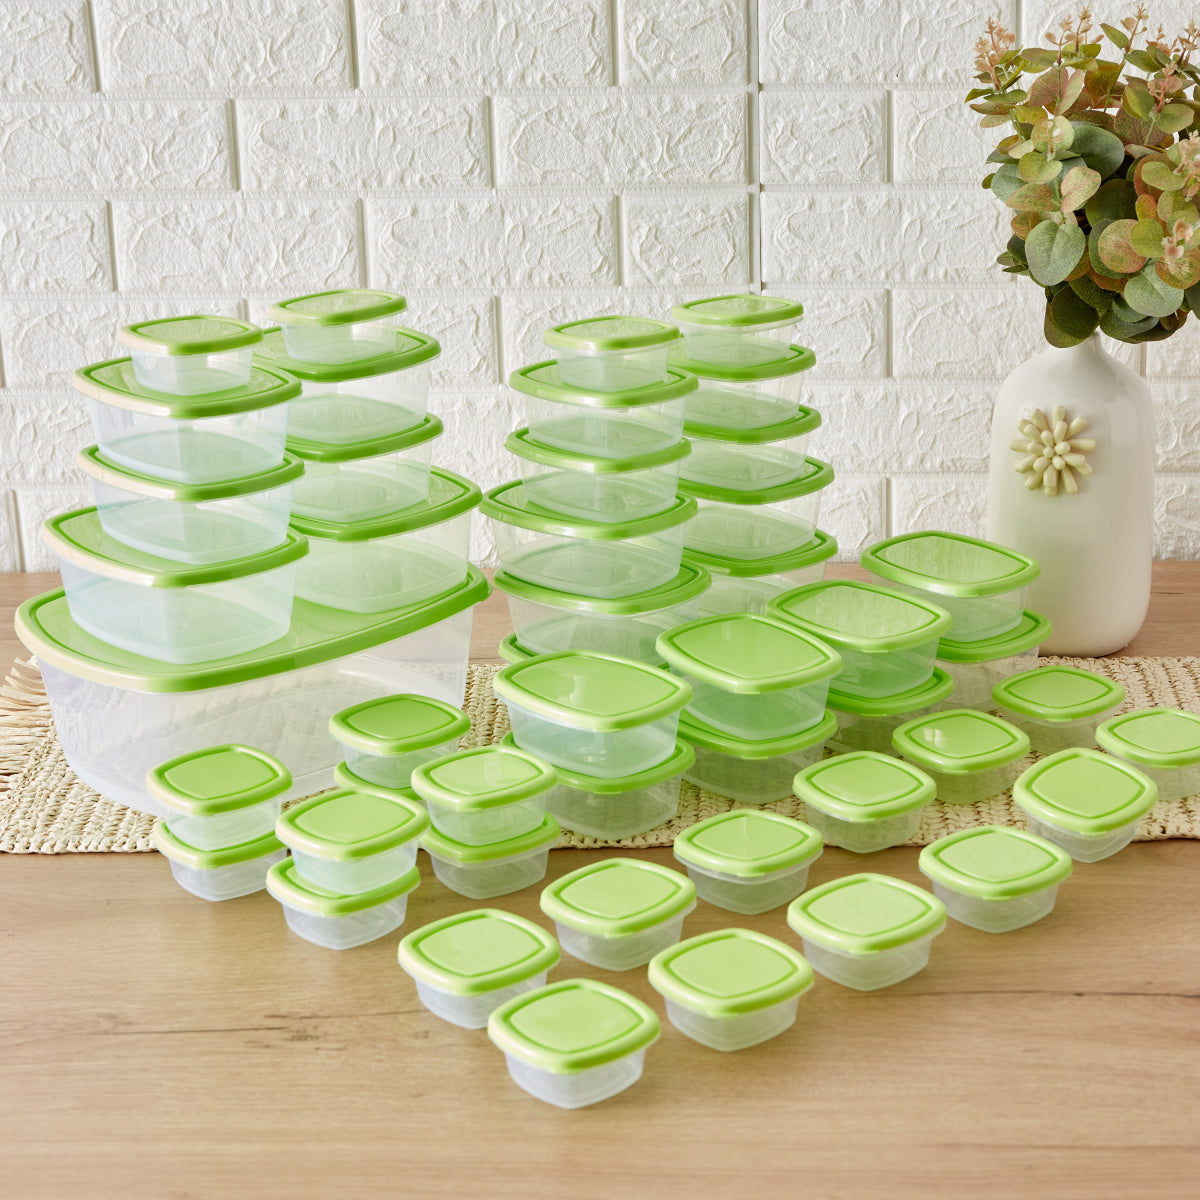 Spectra 49-Piece Food Storage container boxs available at homesop.com which is the largest store for kitchen products .